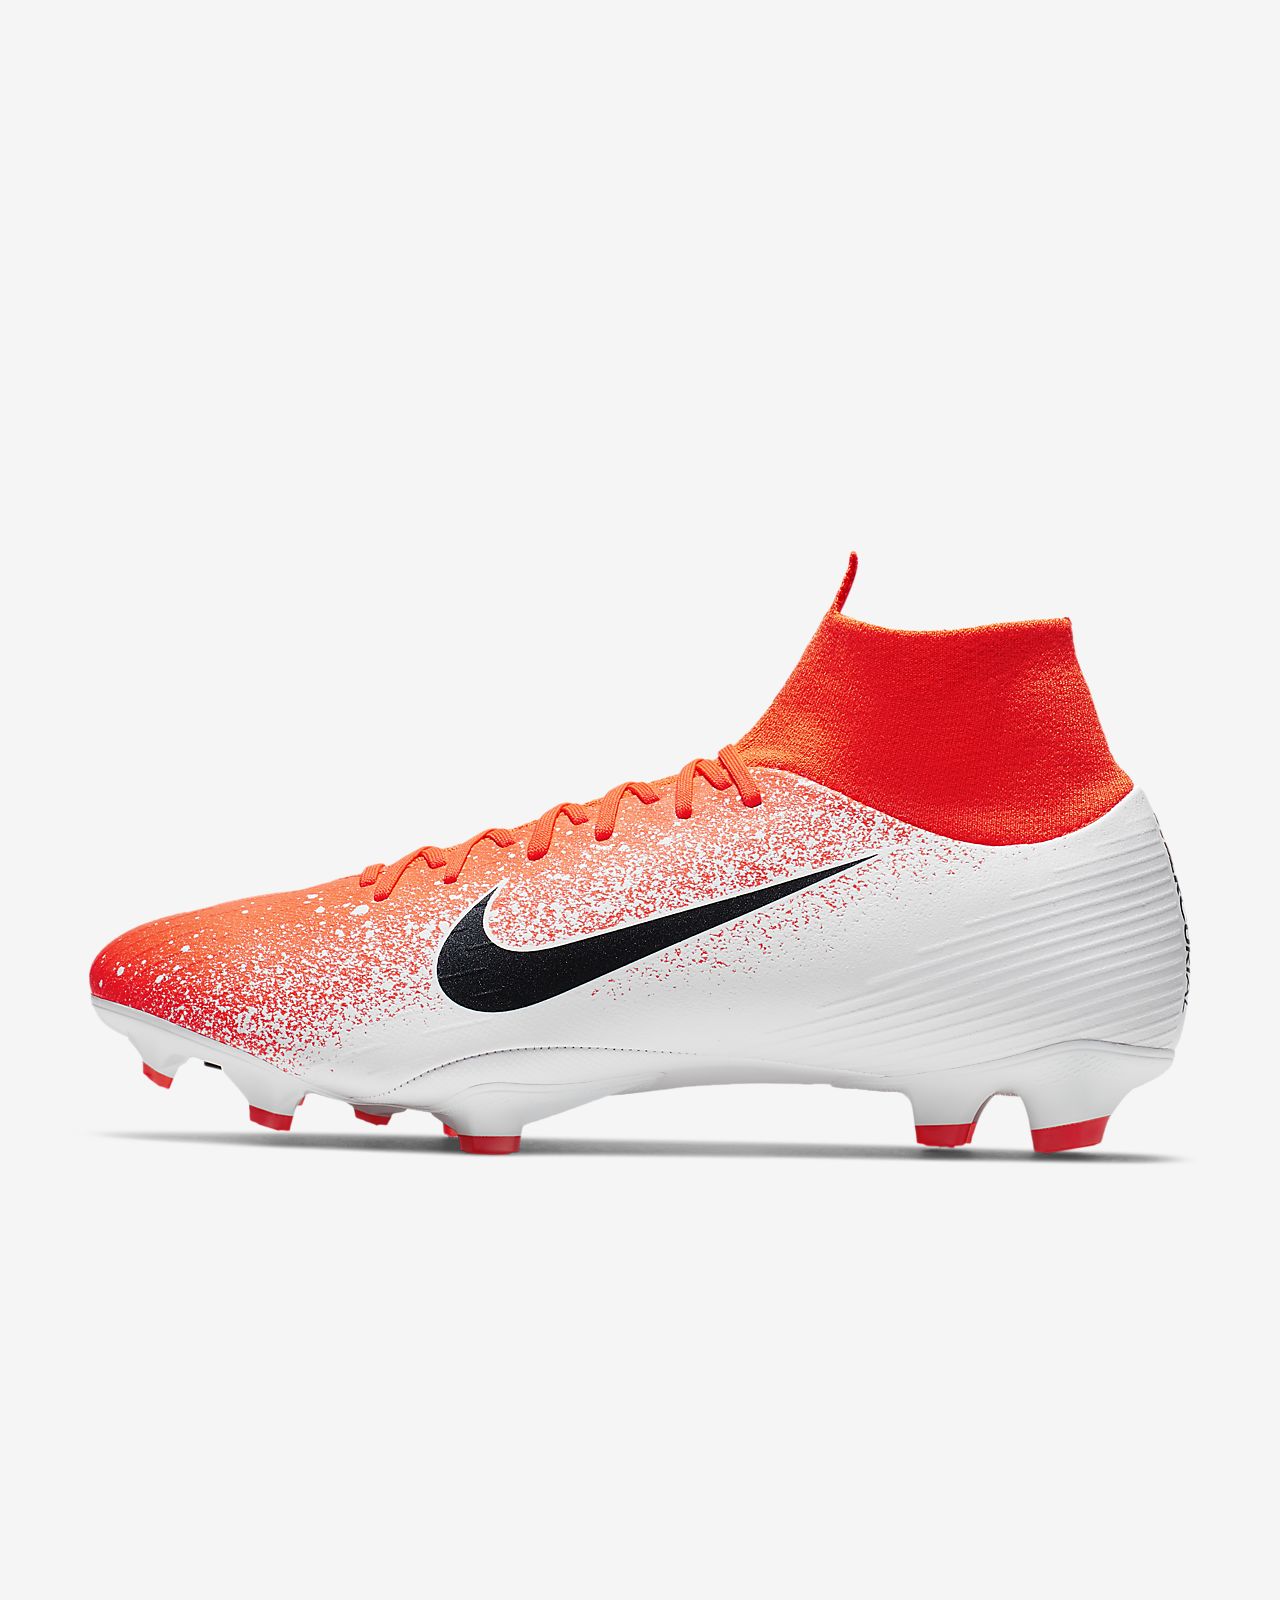 white and orange nike soccer cleats